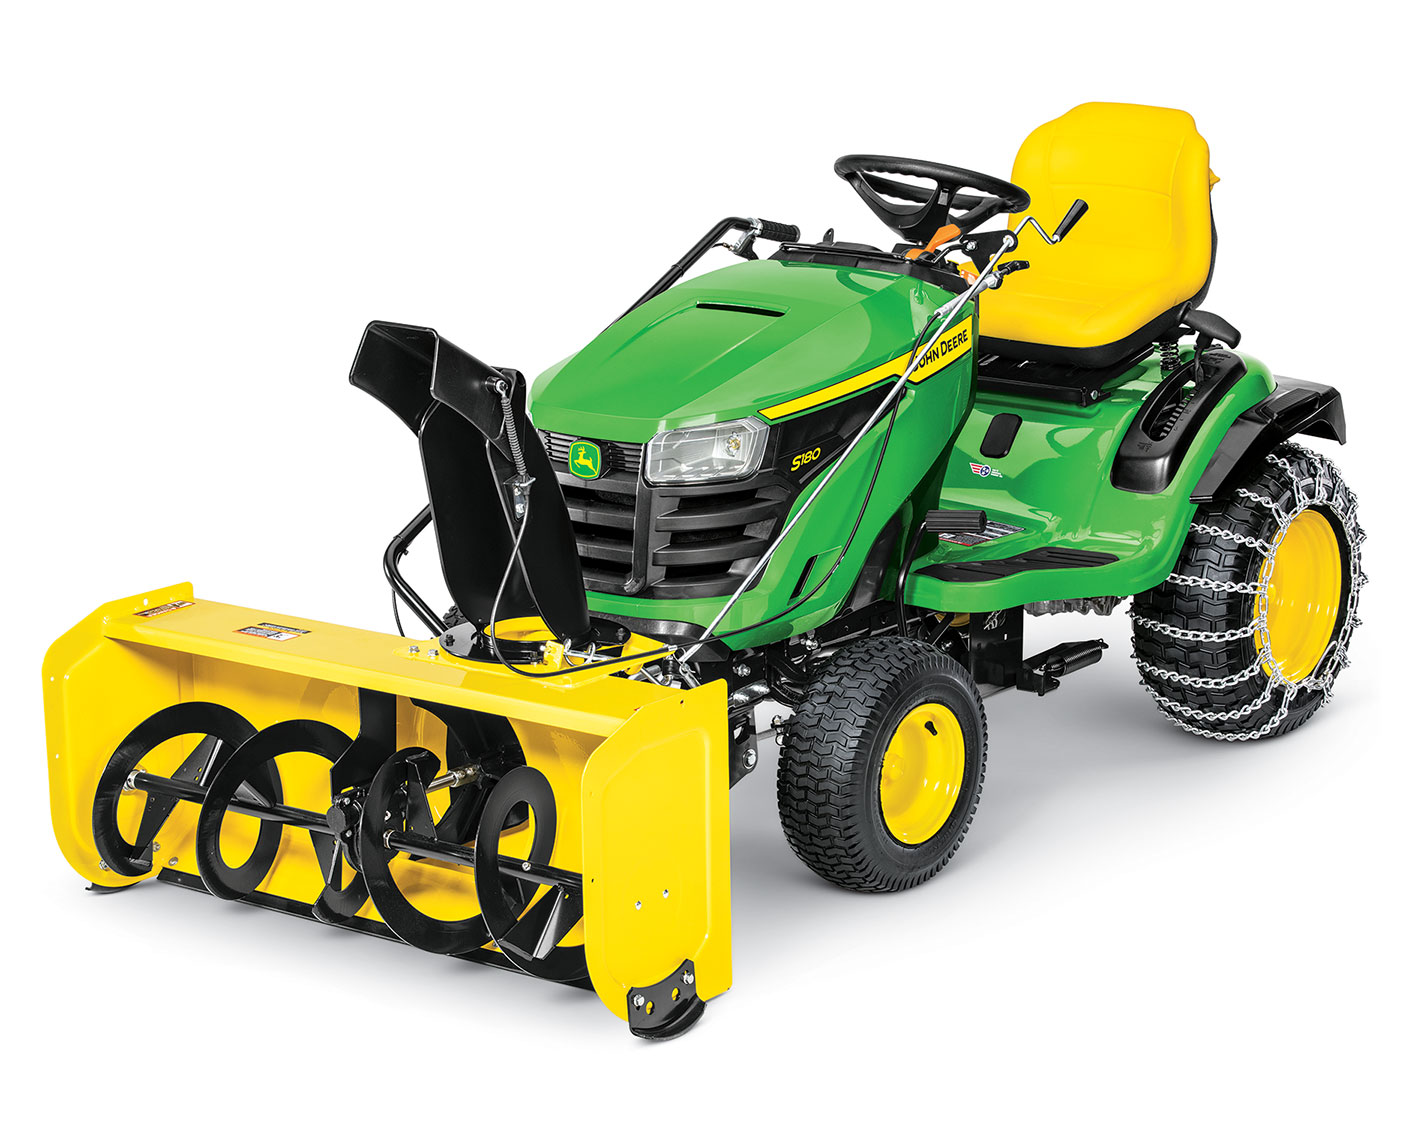 mow to snow service for riding mower compact tractors